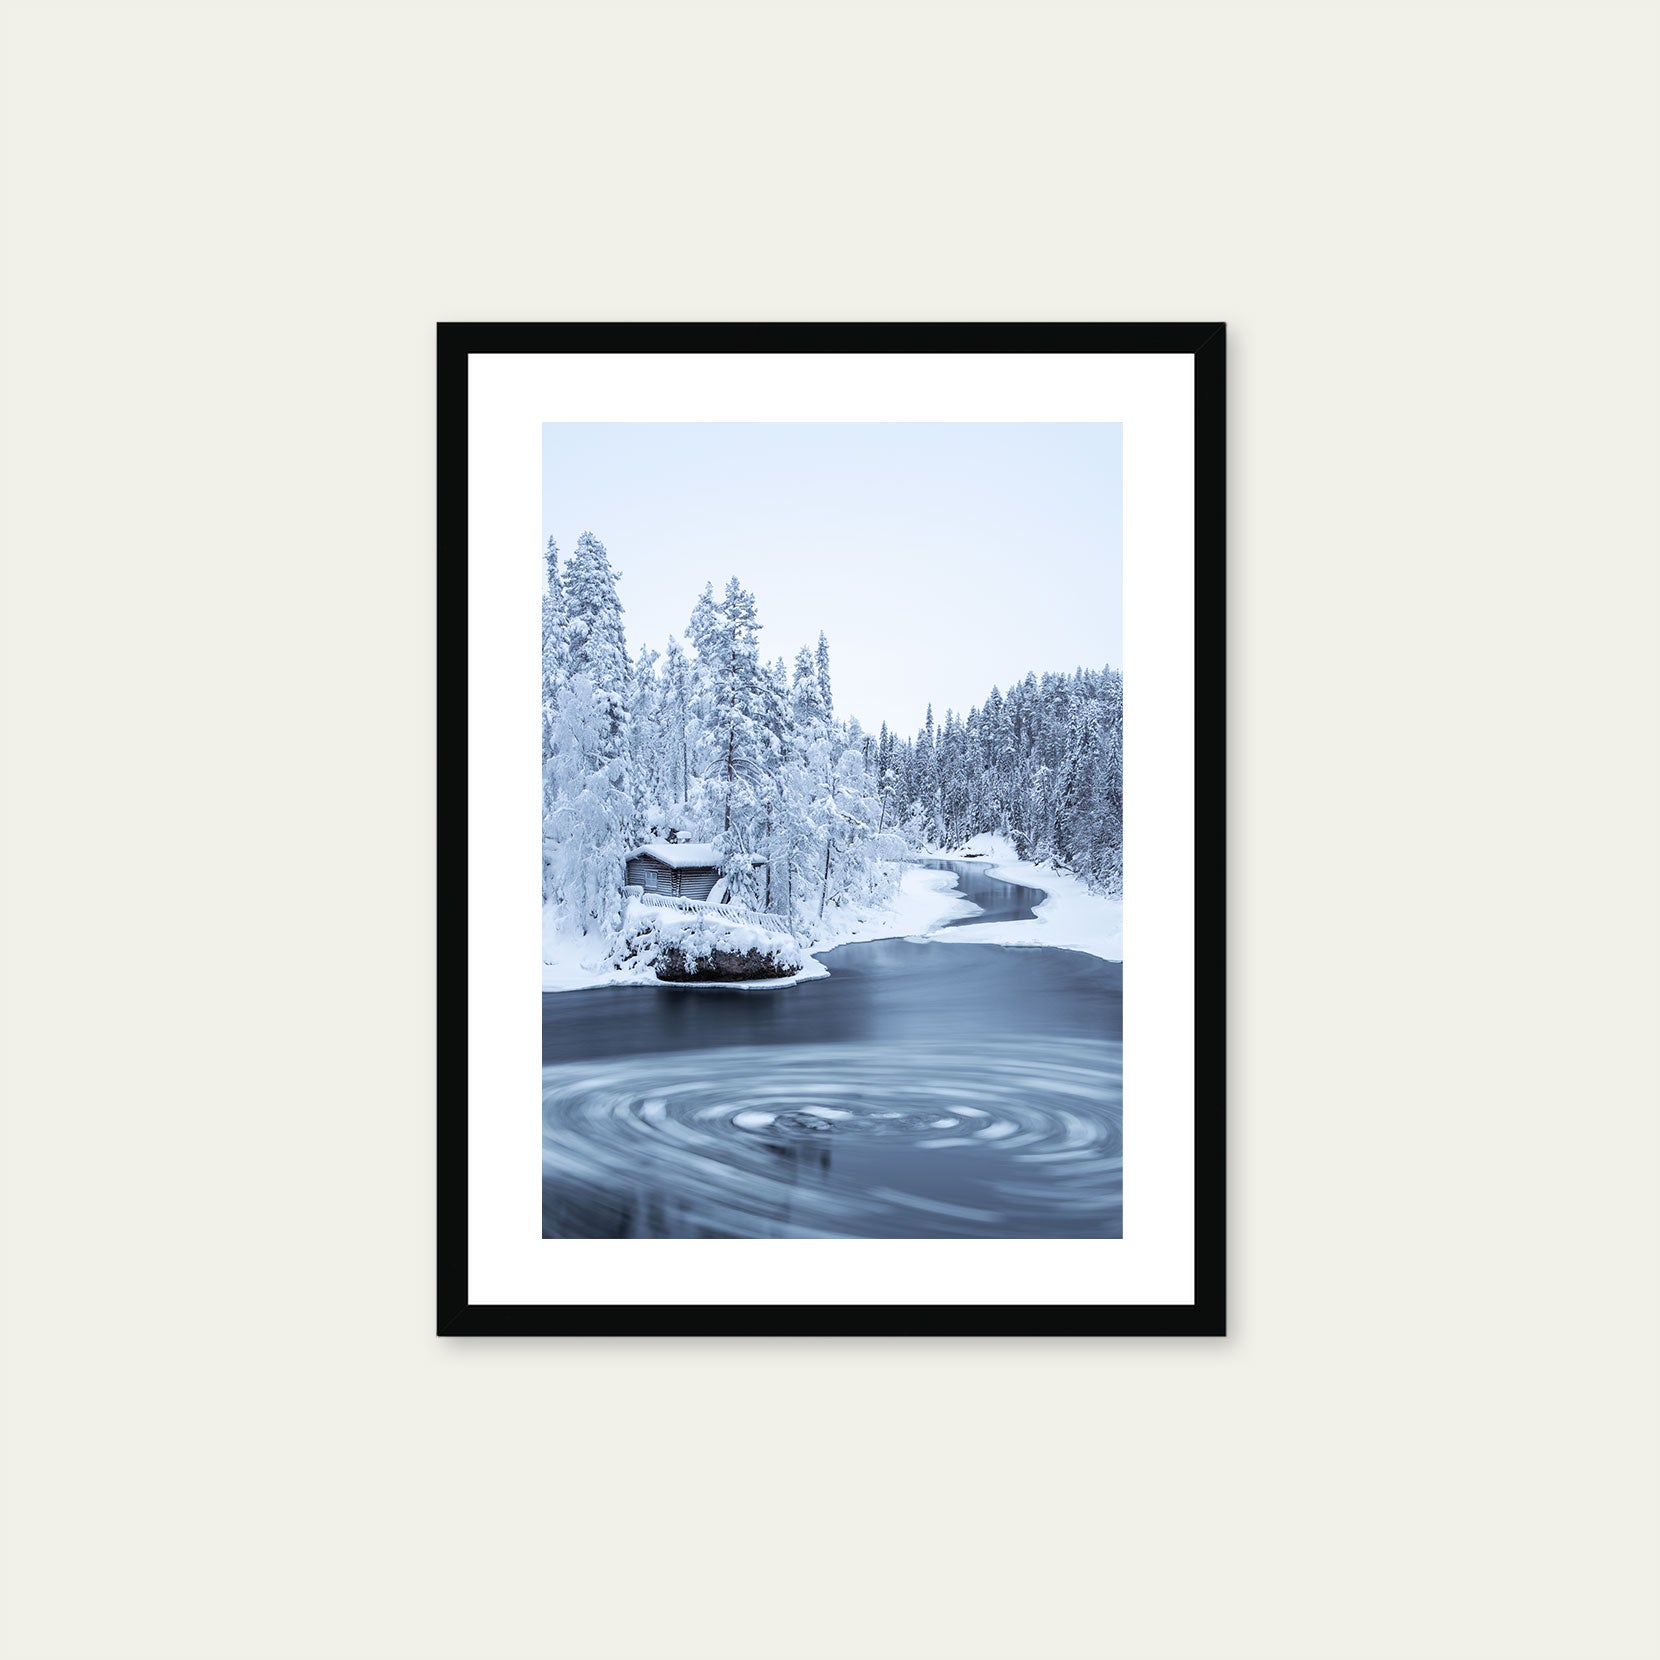 A black framed print of a wooden hut in winter forest